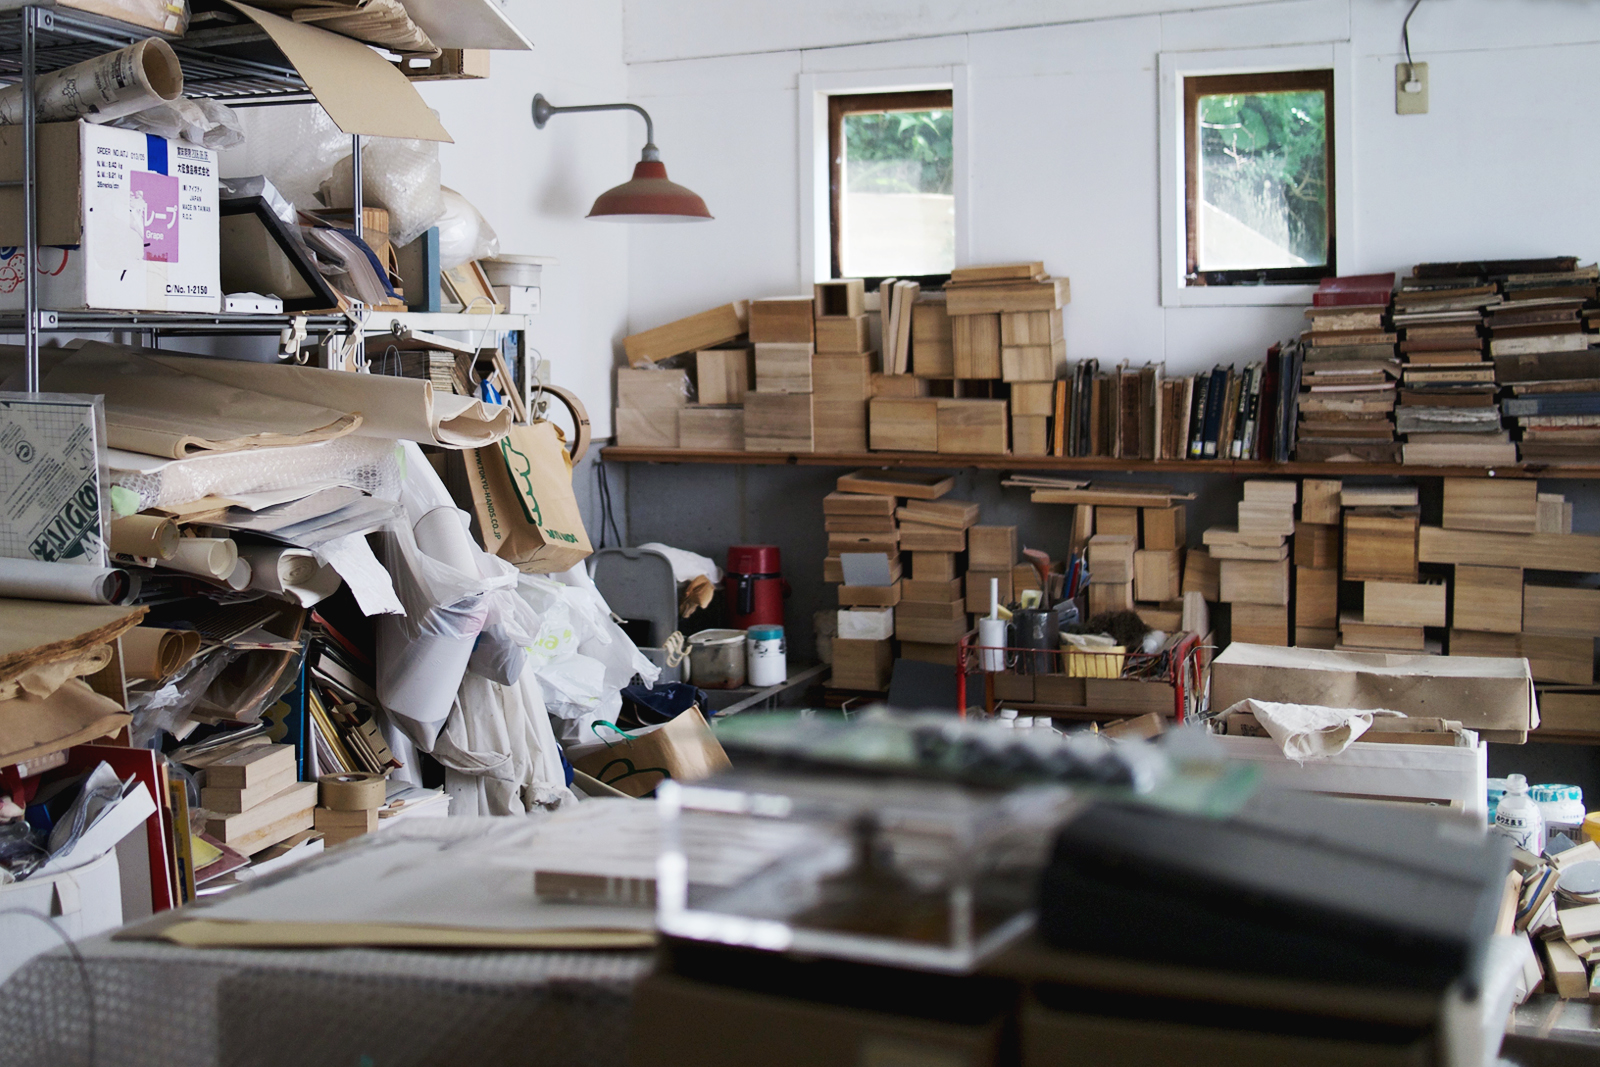 Inside the studio of Michiko Iwata lined with materials and stacks of wood blocks